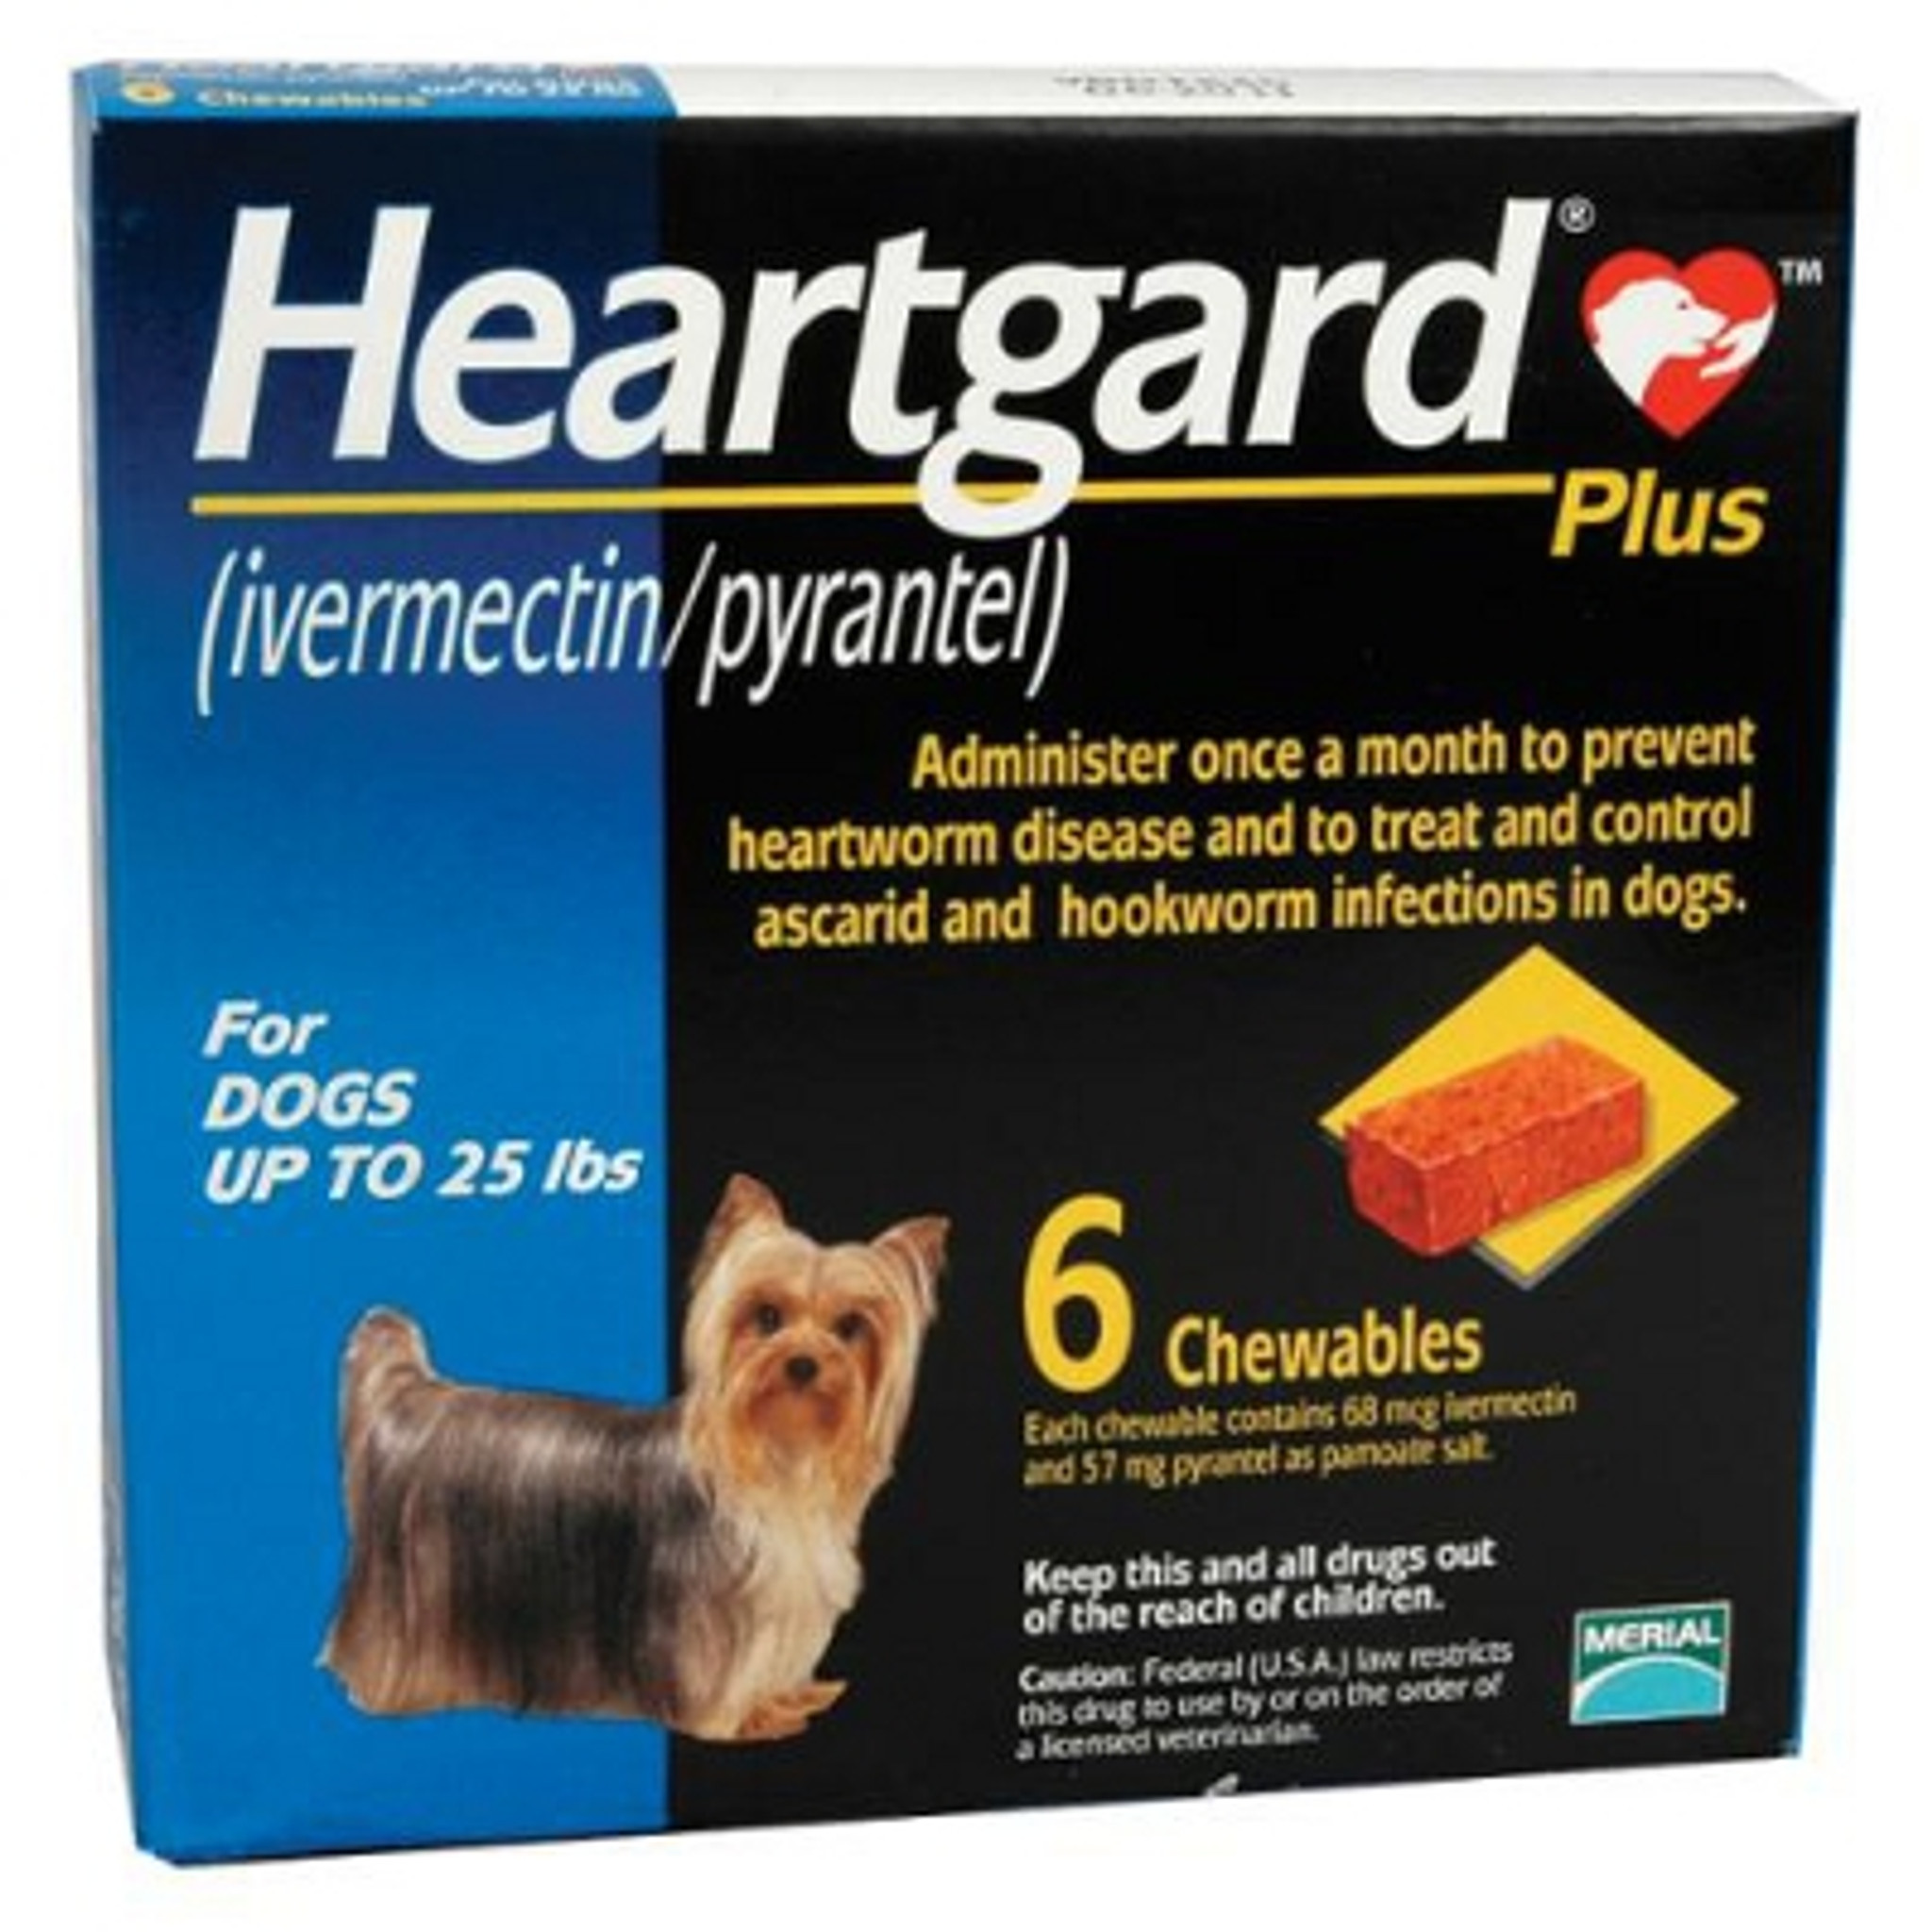 heartgard-plus-chewables-for-dogs-up-to-25-lbs-blue-6-pack-discount